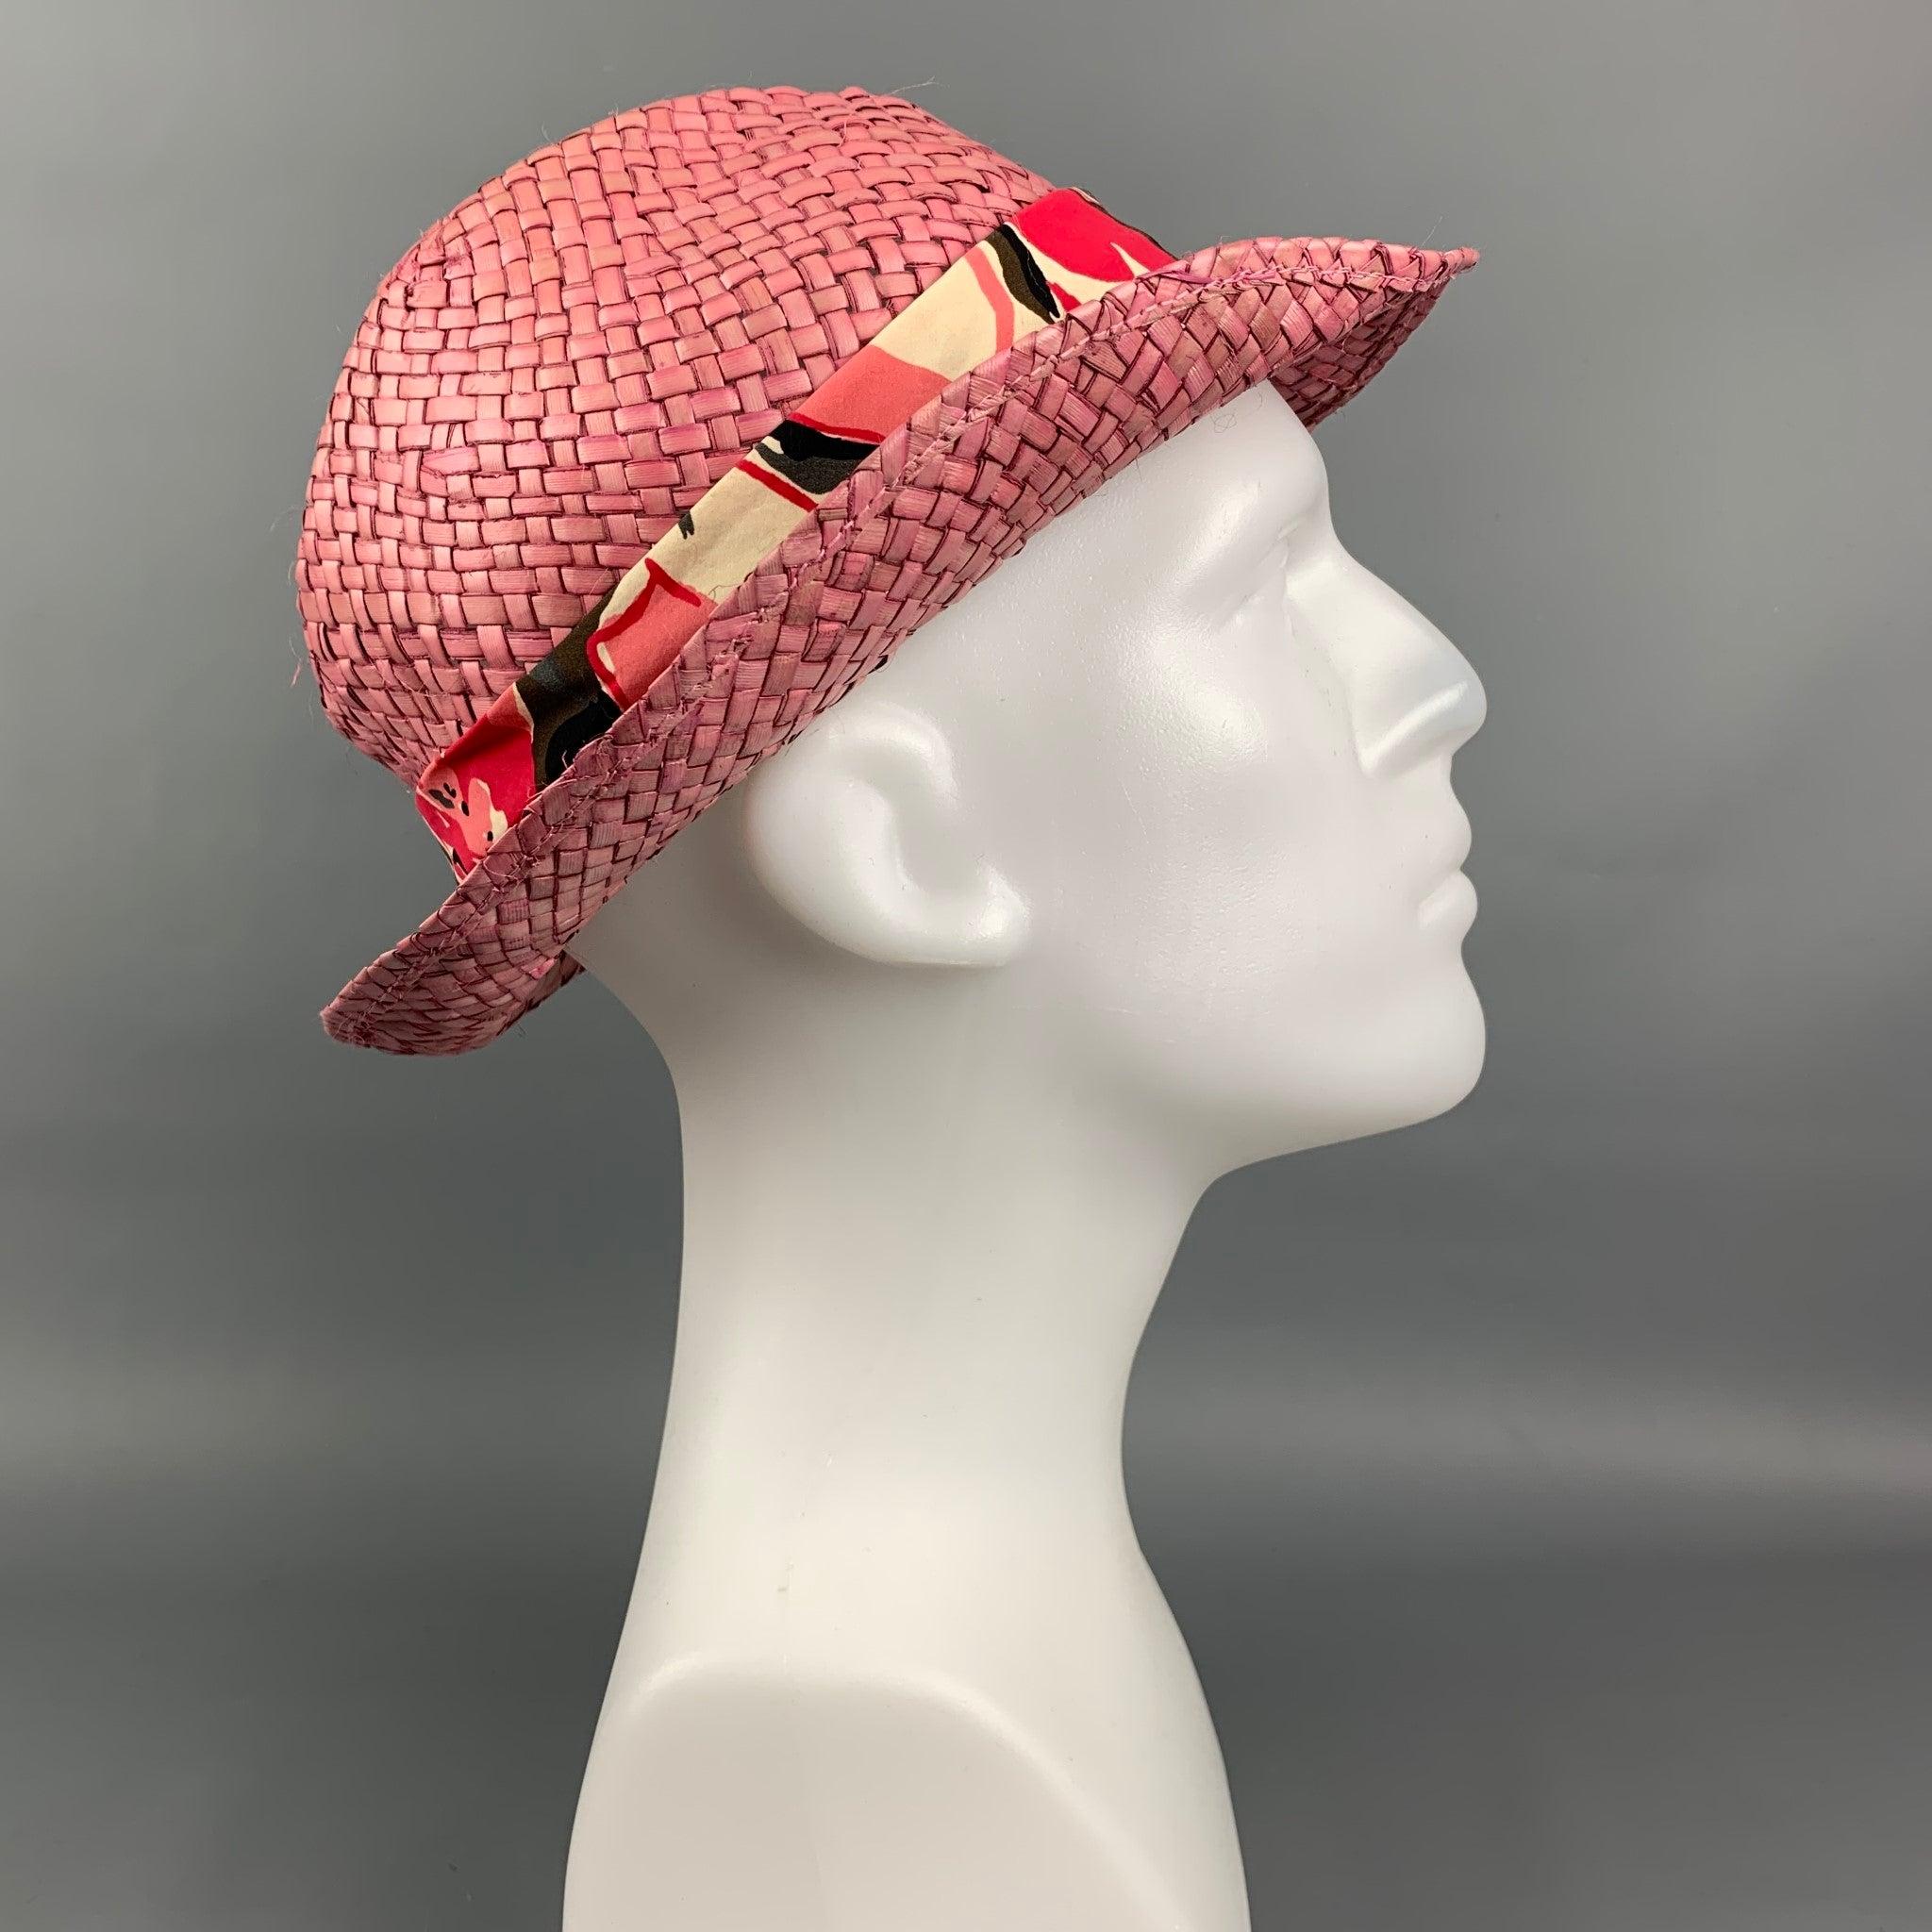 PAUL SMITH hat comes in a oink woven straw material featuring a floral band detail.
Very Good
Pre-Owned Condition. 

Marked:   Size tag removed.  

Measurements: 
  Opening: 22 inches  Brim:
2 inches  Height: 5 inches 
  
  
 
Reference: